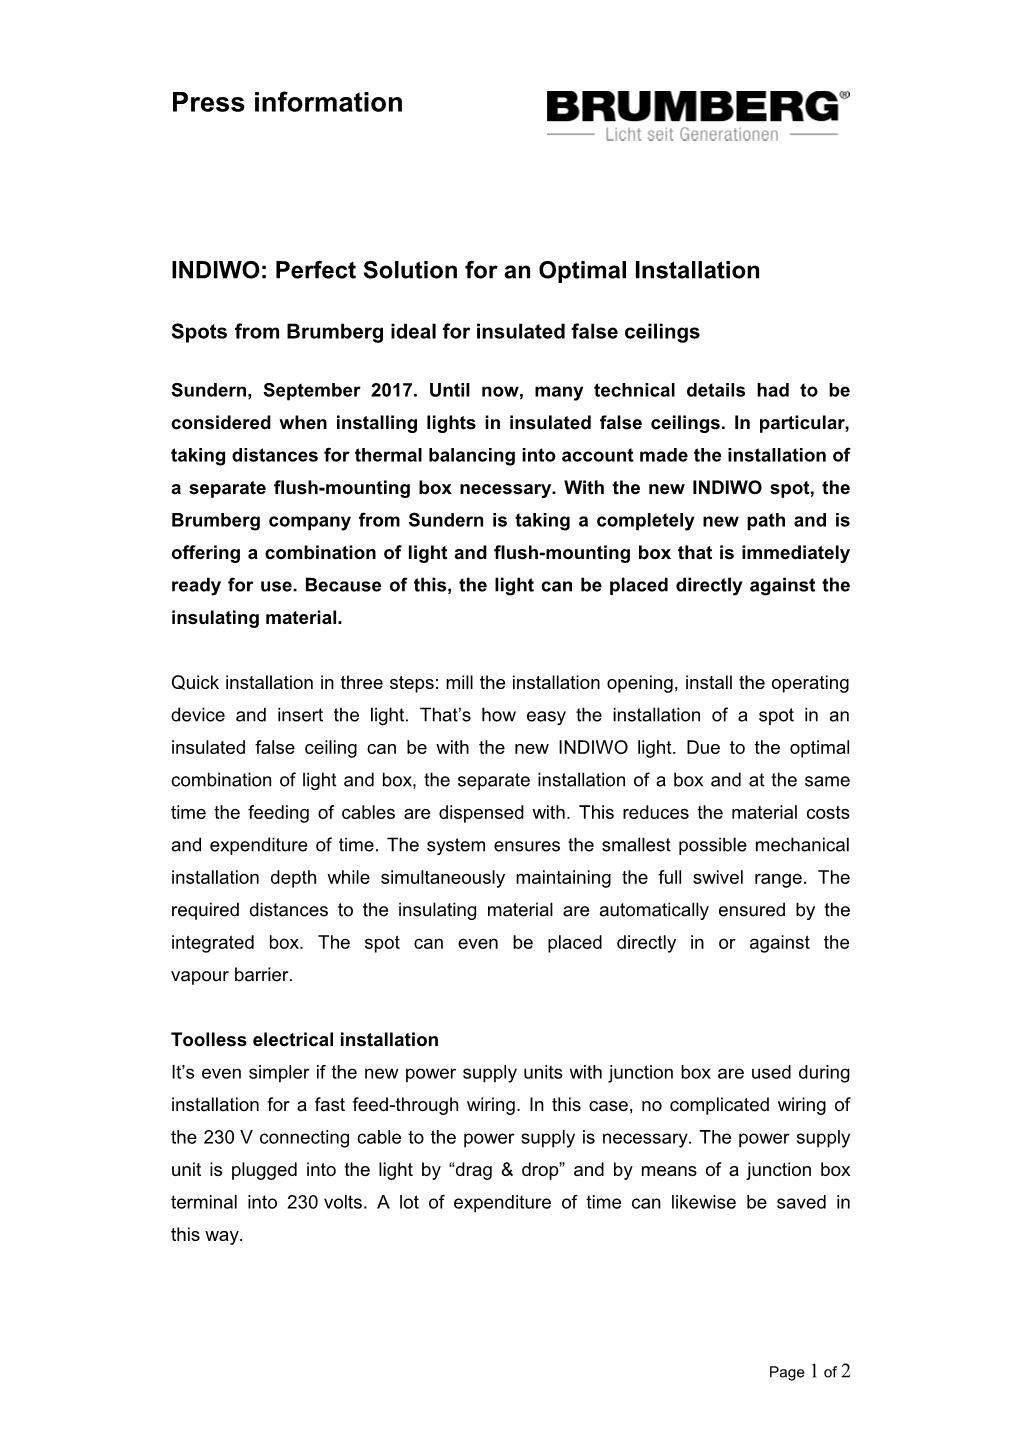 INDIWO: Perfect Solution for an Optimal Installation